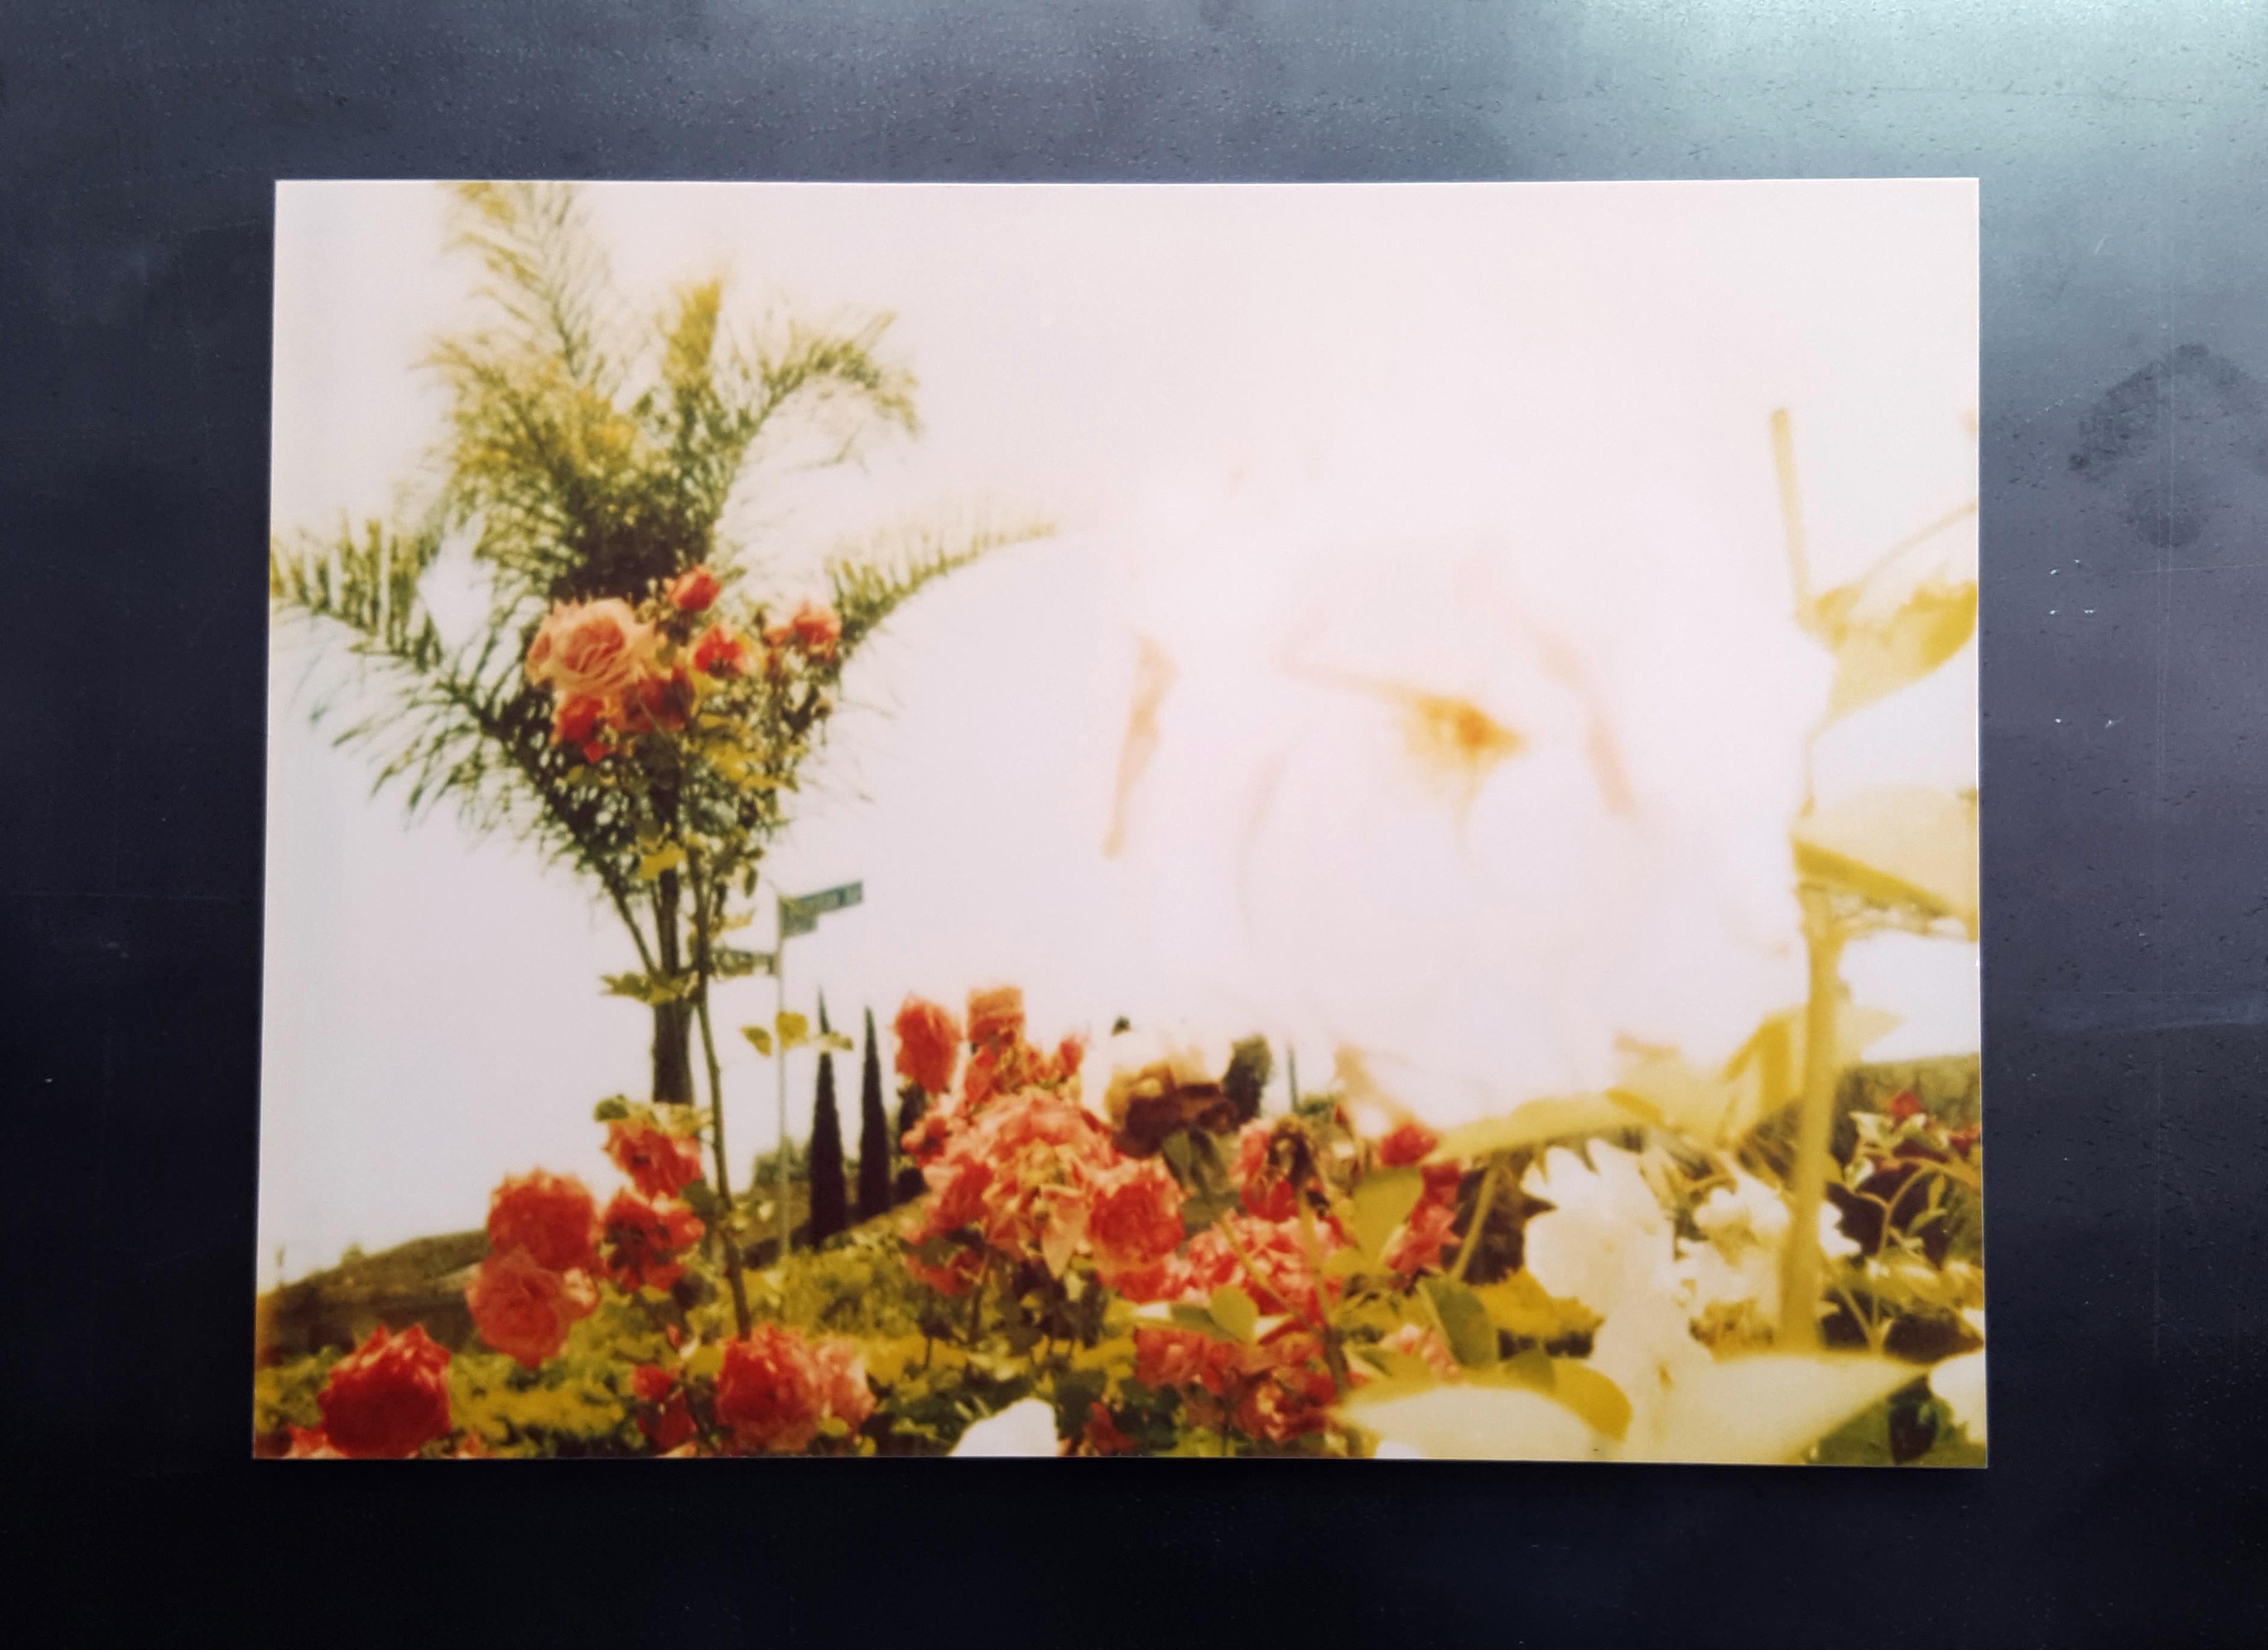 Pink Rose (Suburbia) - analog, mounted - Photograph by Stefanie Schneider